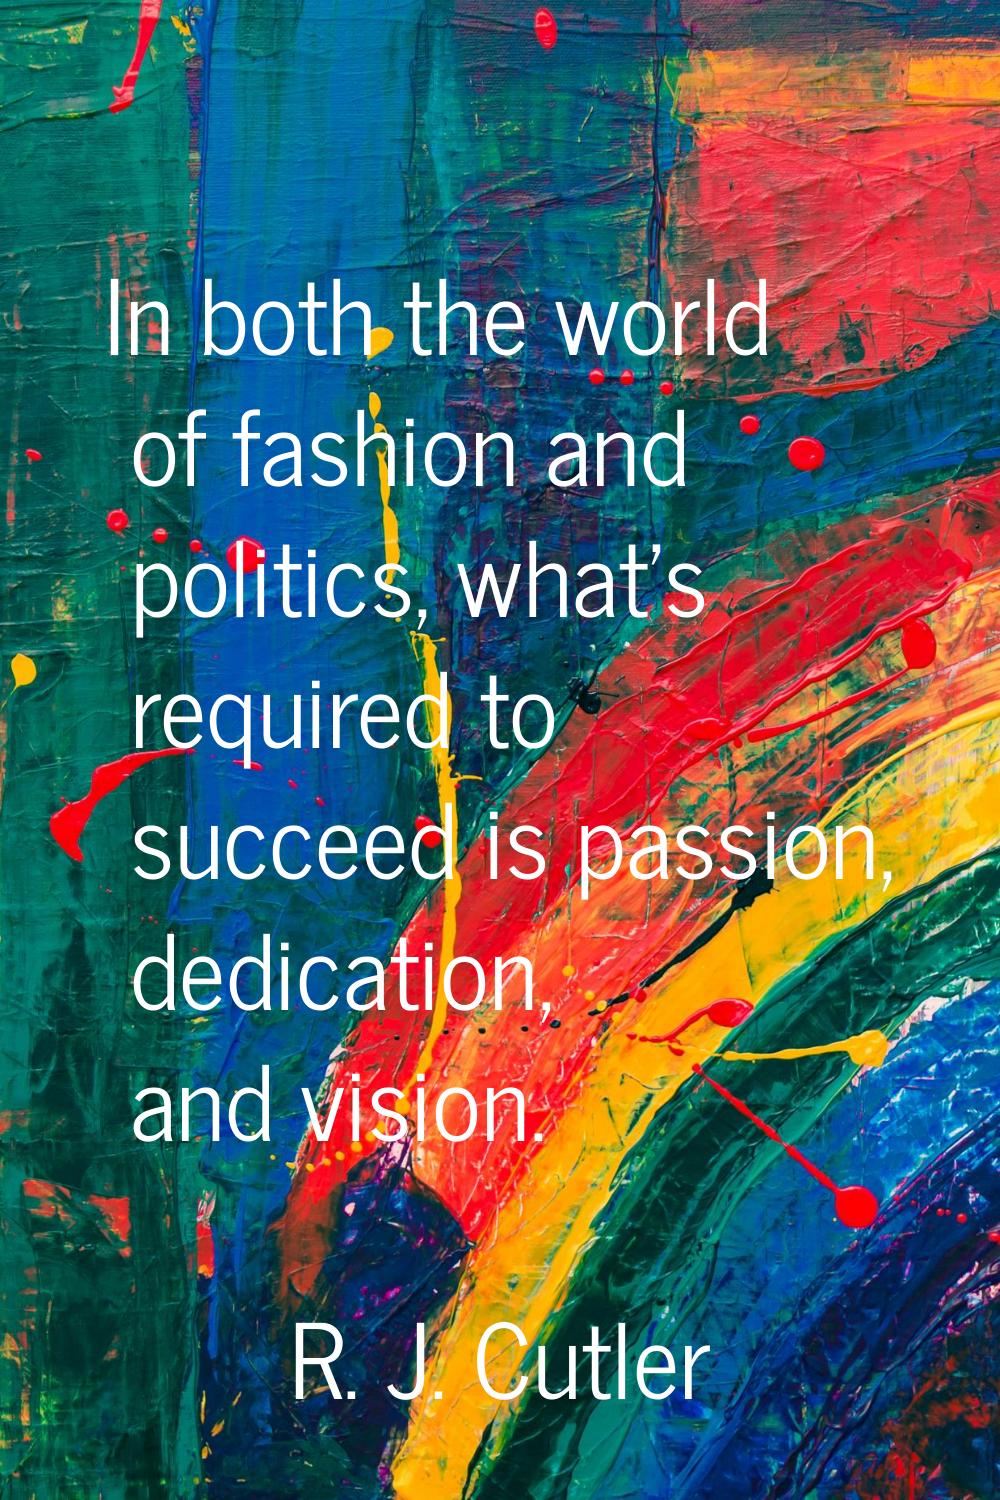 In both the world of fashion and politics, what's required to succeed is passion, dedication, and v